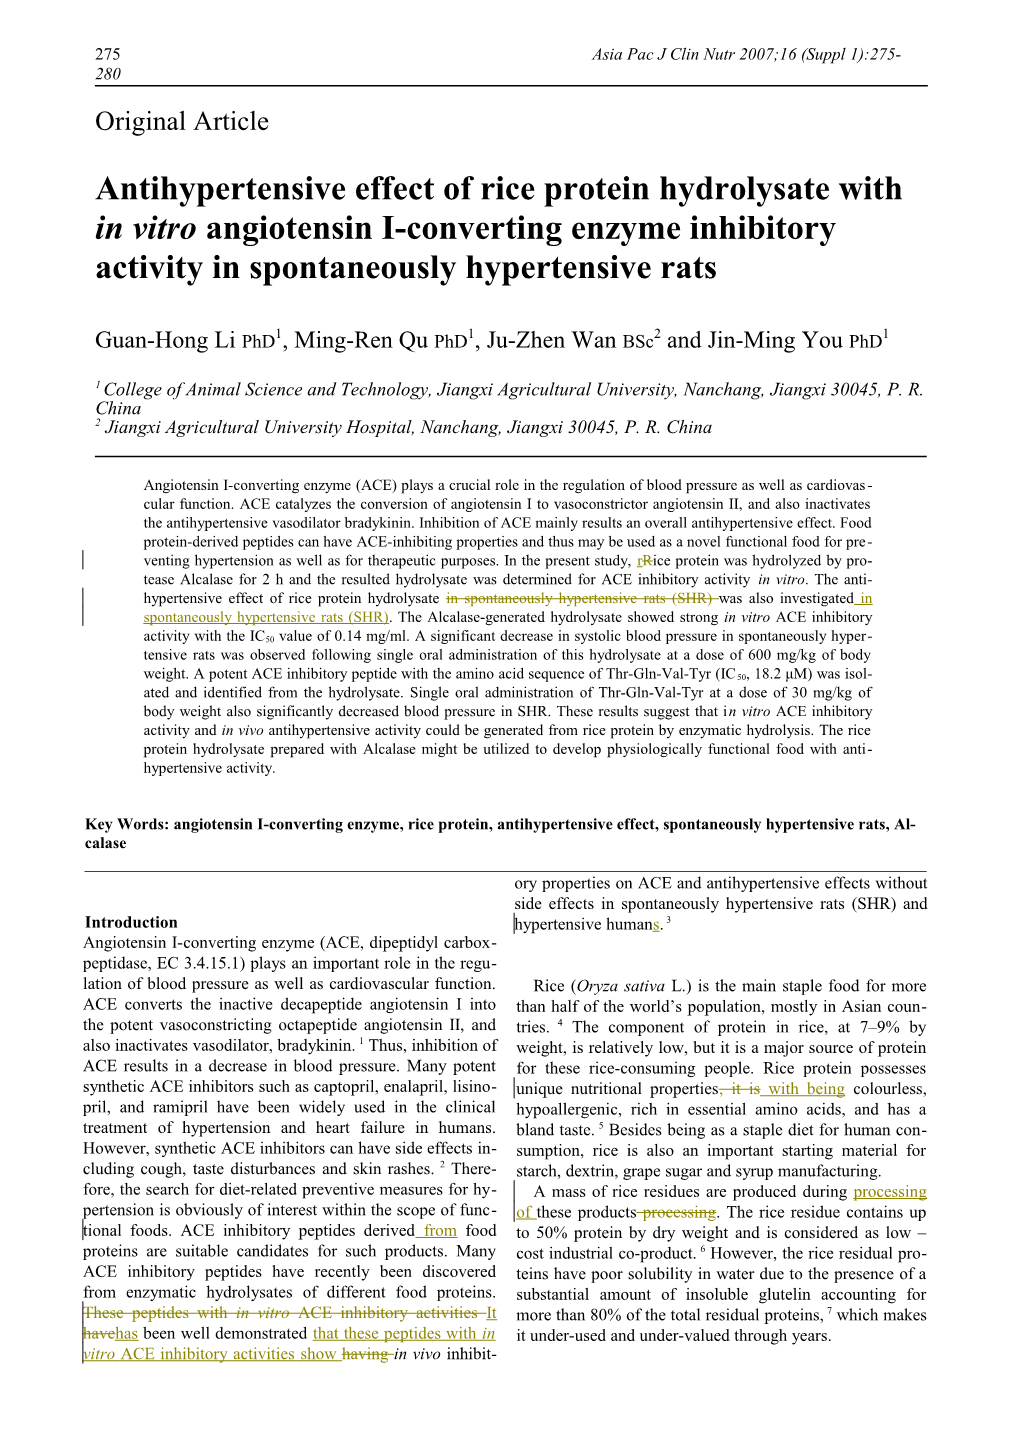 Antihypertensive Effect of Rice Protein Hydrolysate with in Vitro Angiotensin I-Converting